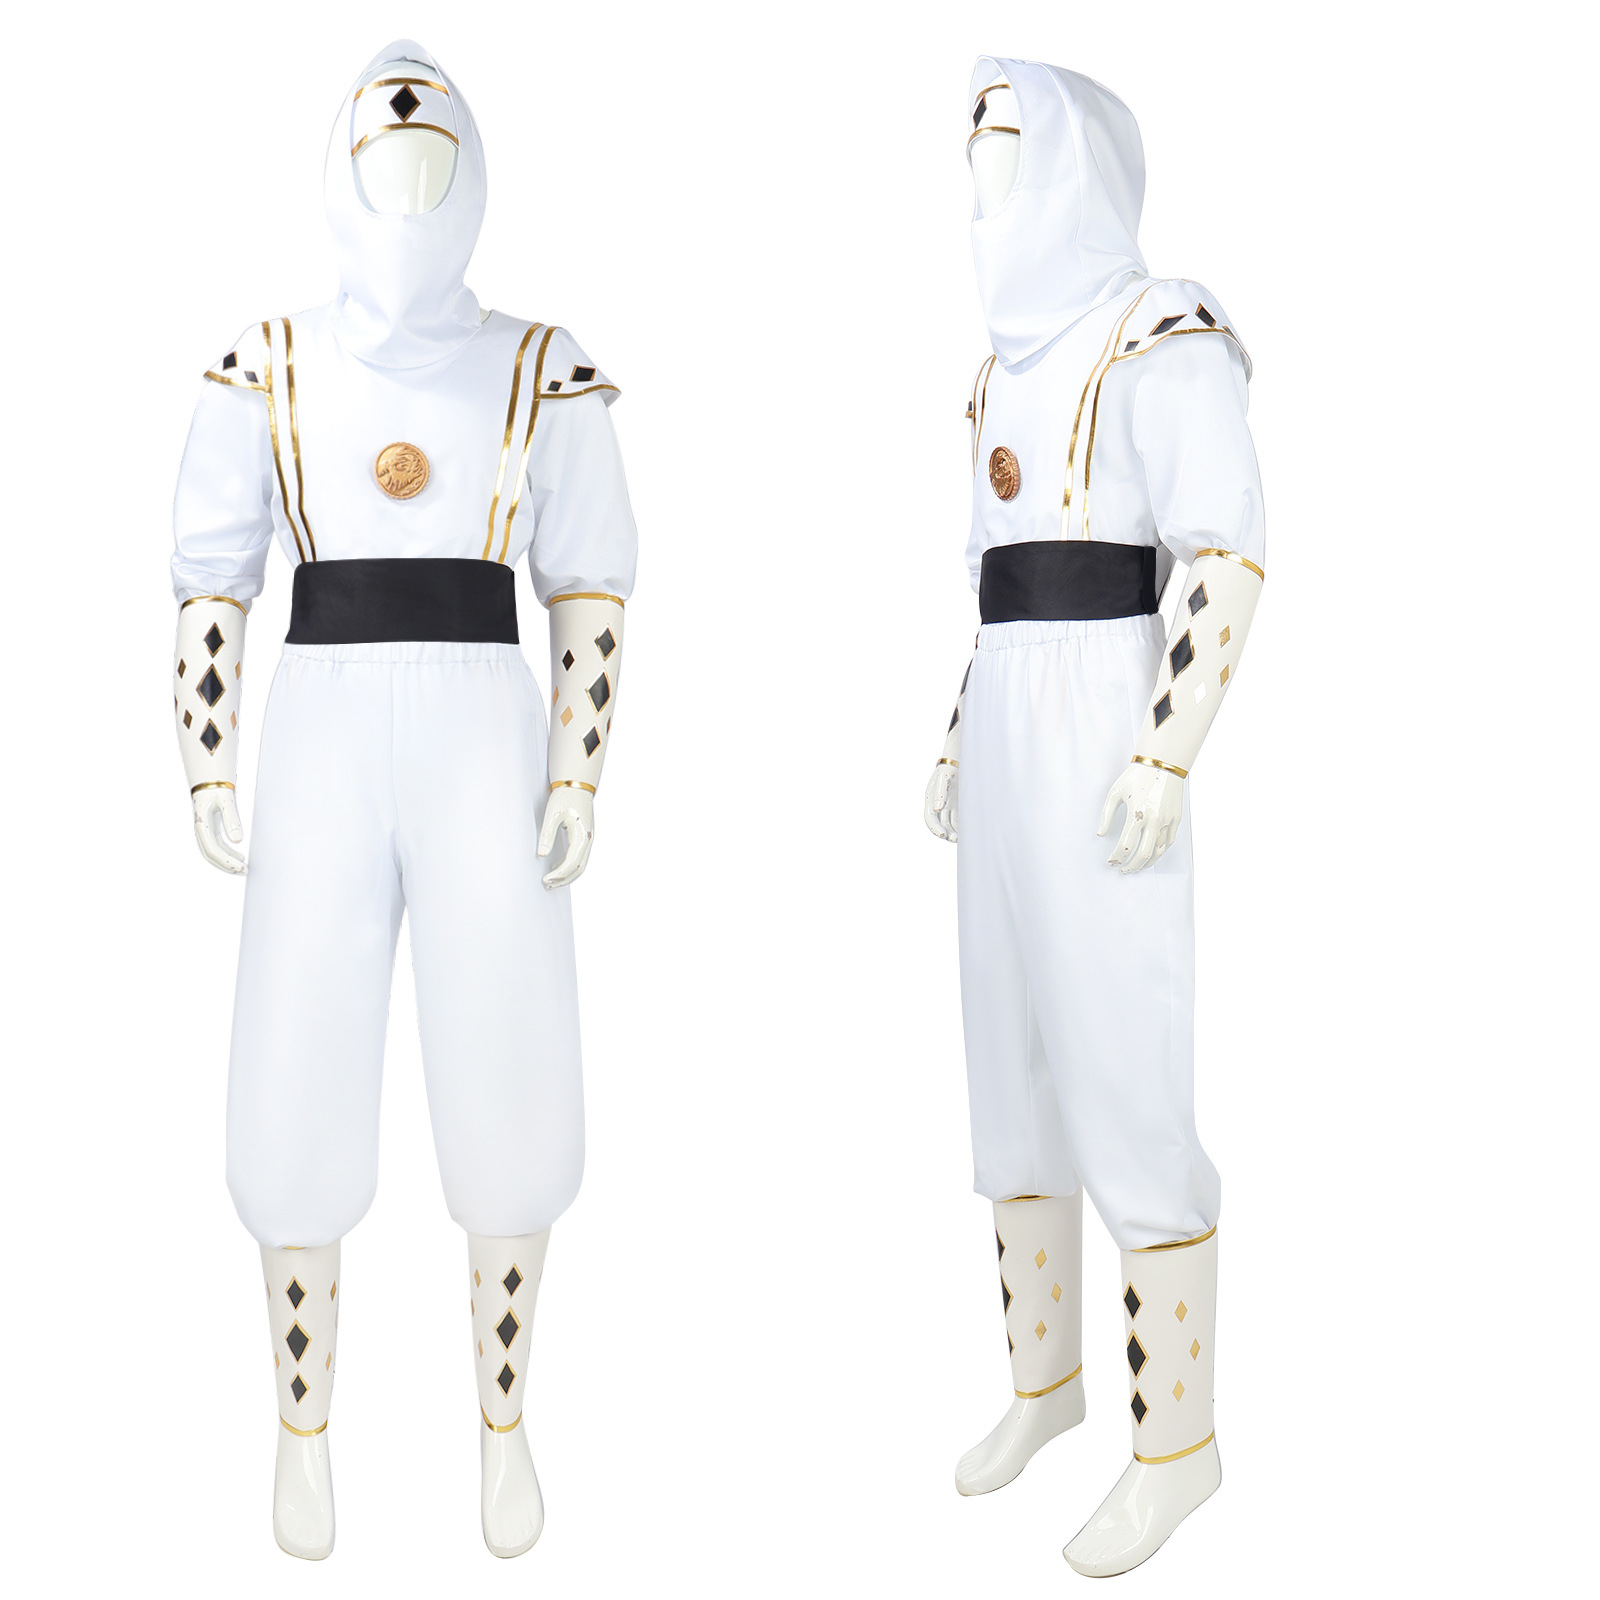 Tommy Oliver White Ninja Ranger Cosplay Costumes Top Level Outfits